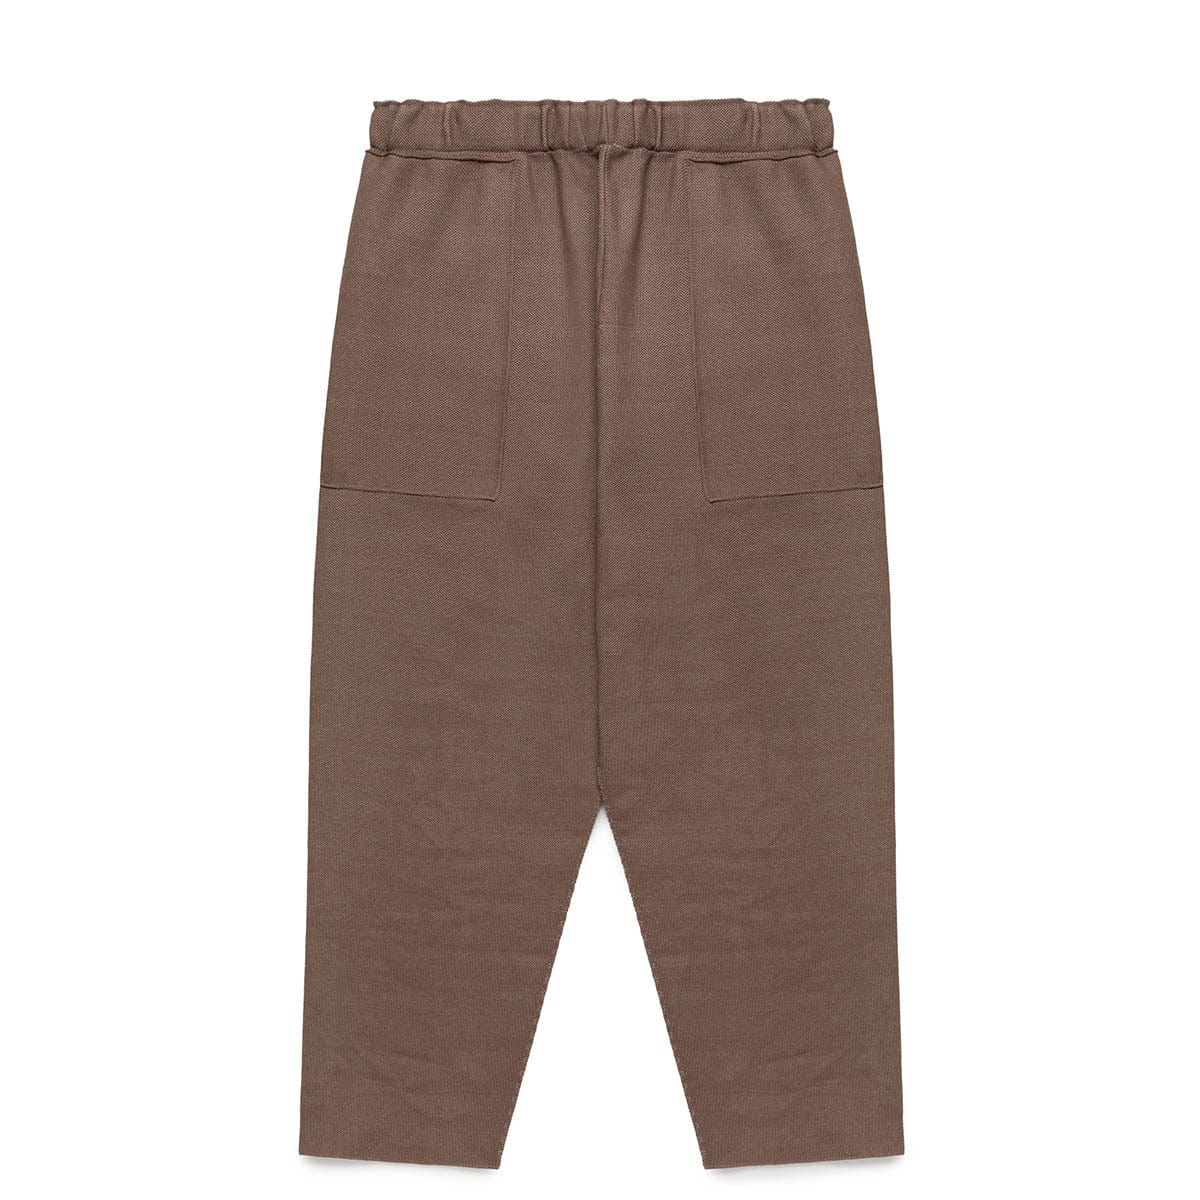 Homme Plissé Issey Miyake Bottoms 44-BROWN / O/S INLAID KNIT TROUSERS